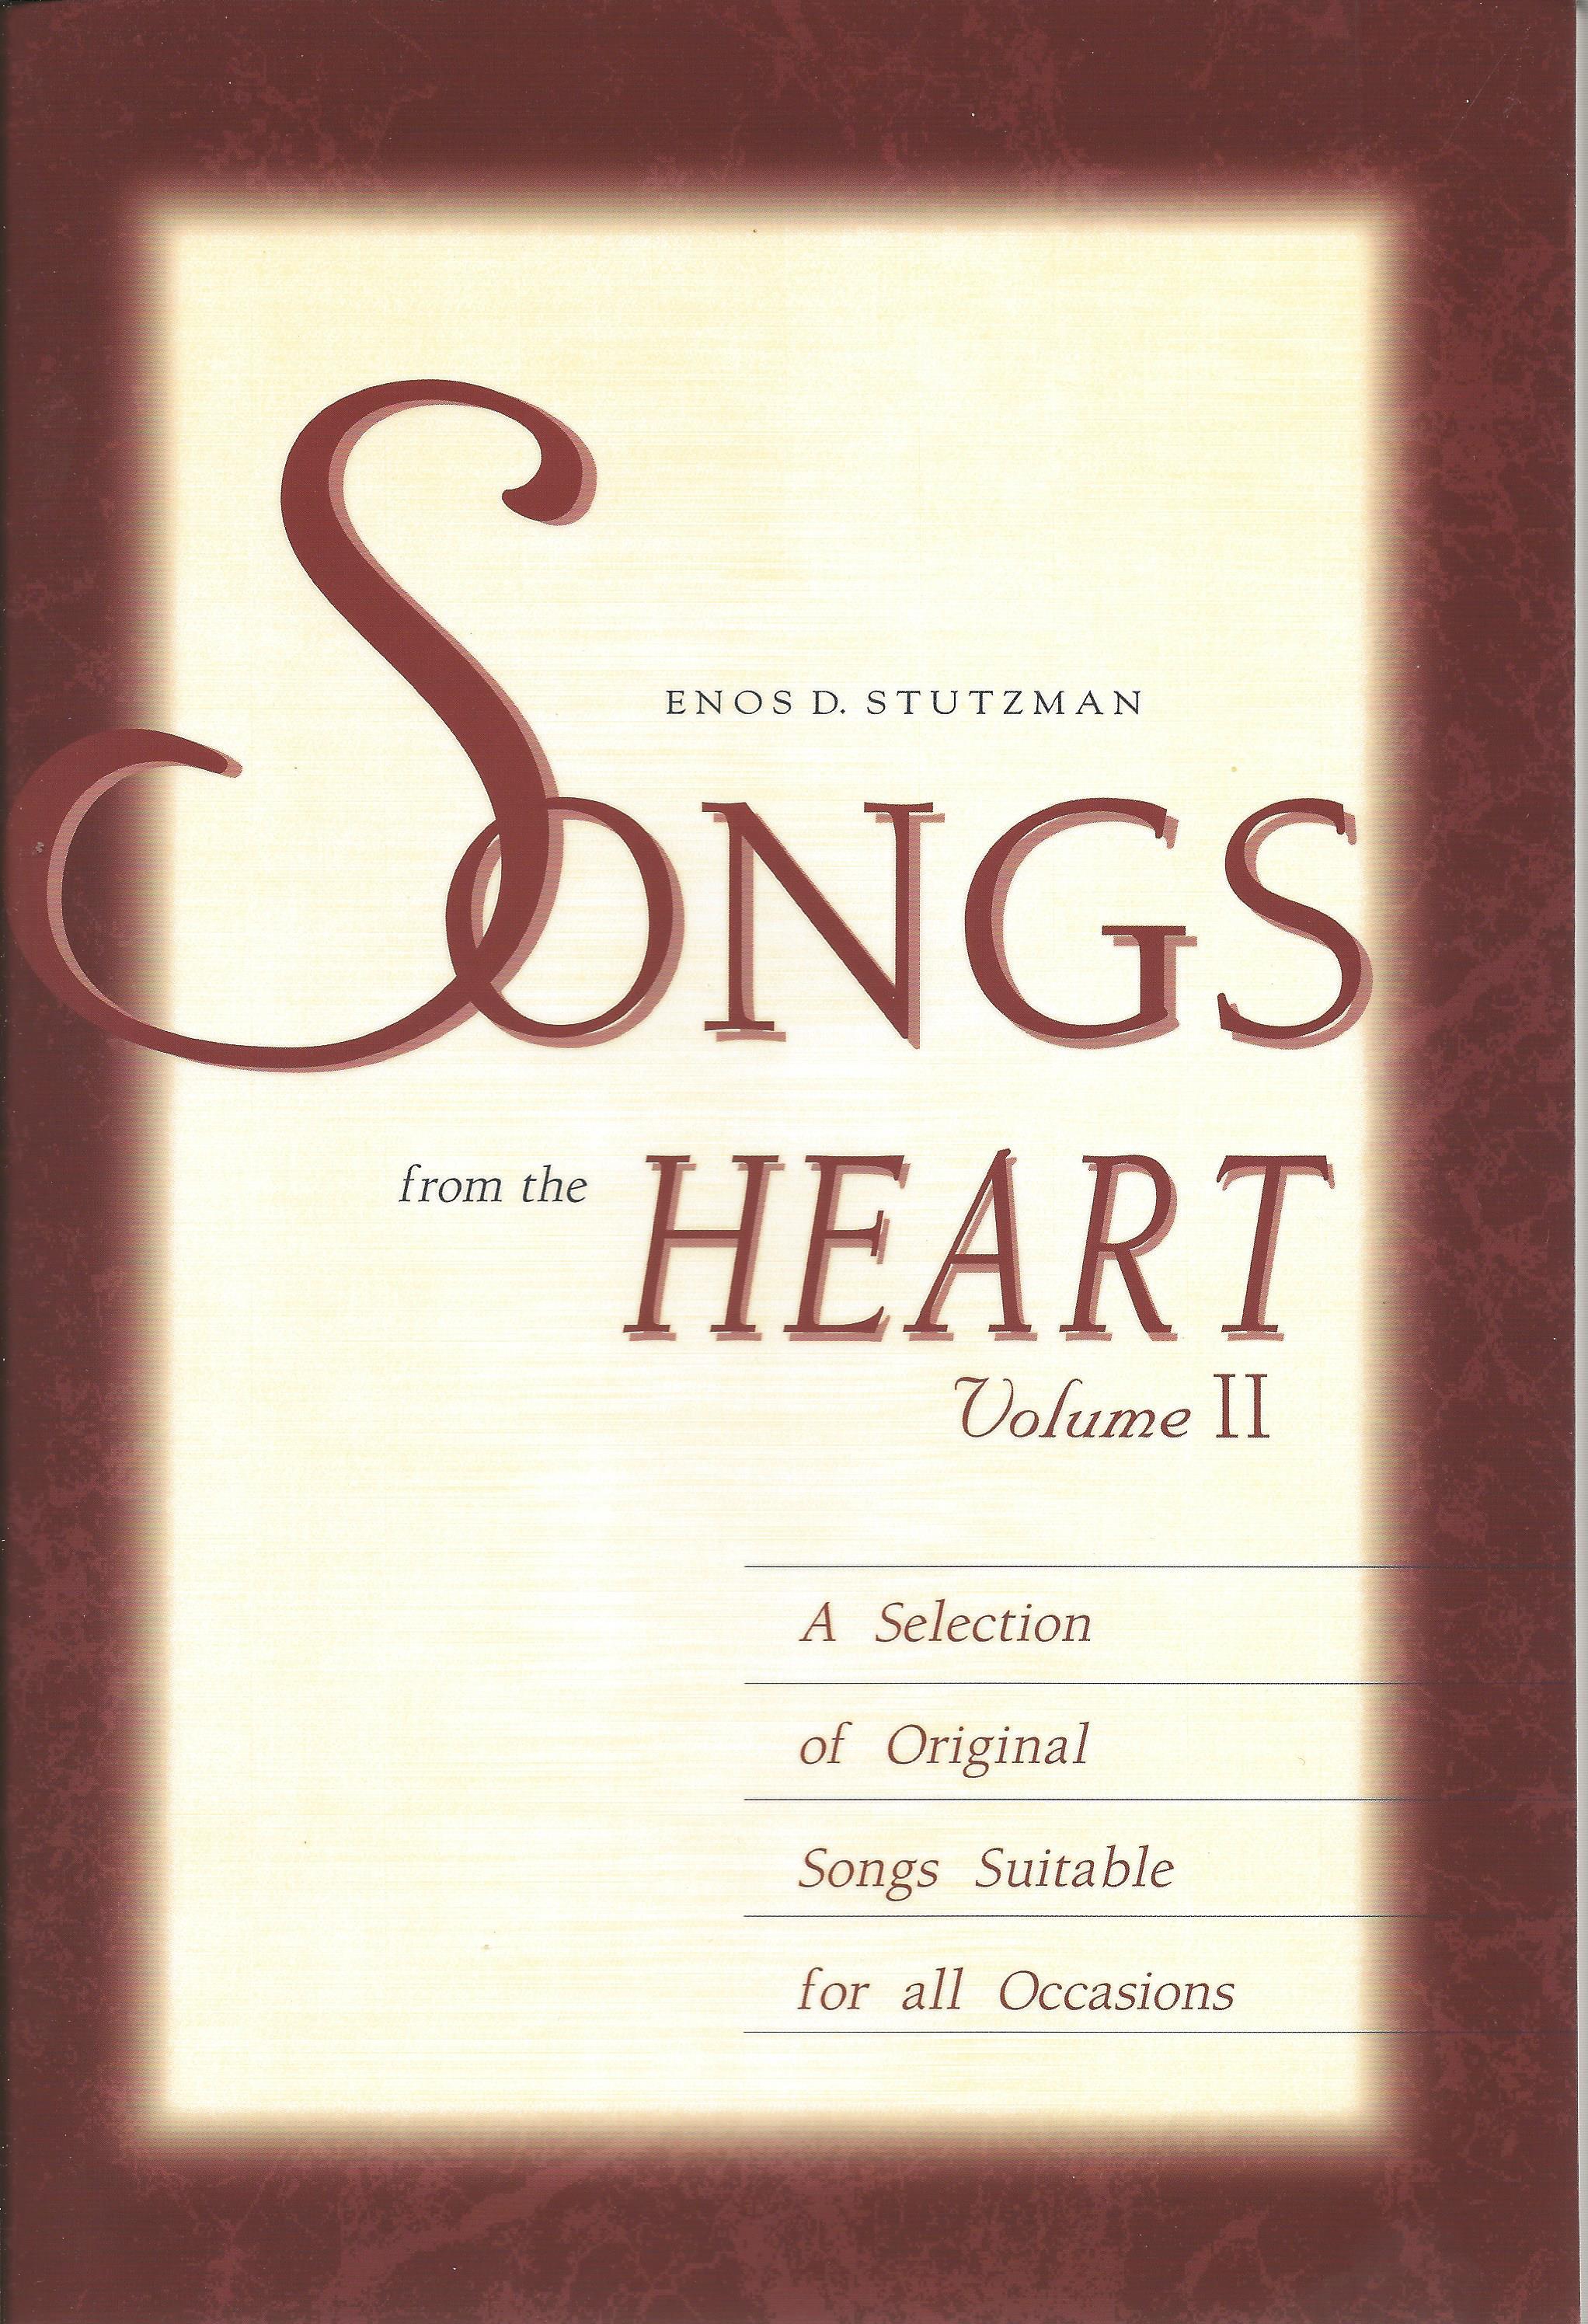 SONGS FROM THE HEART VOLUME II Enos Stutzman - Click Image to Close